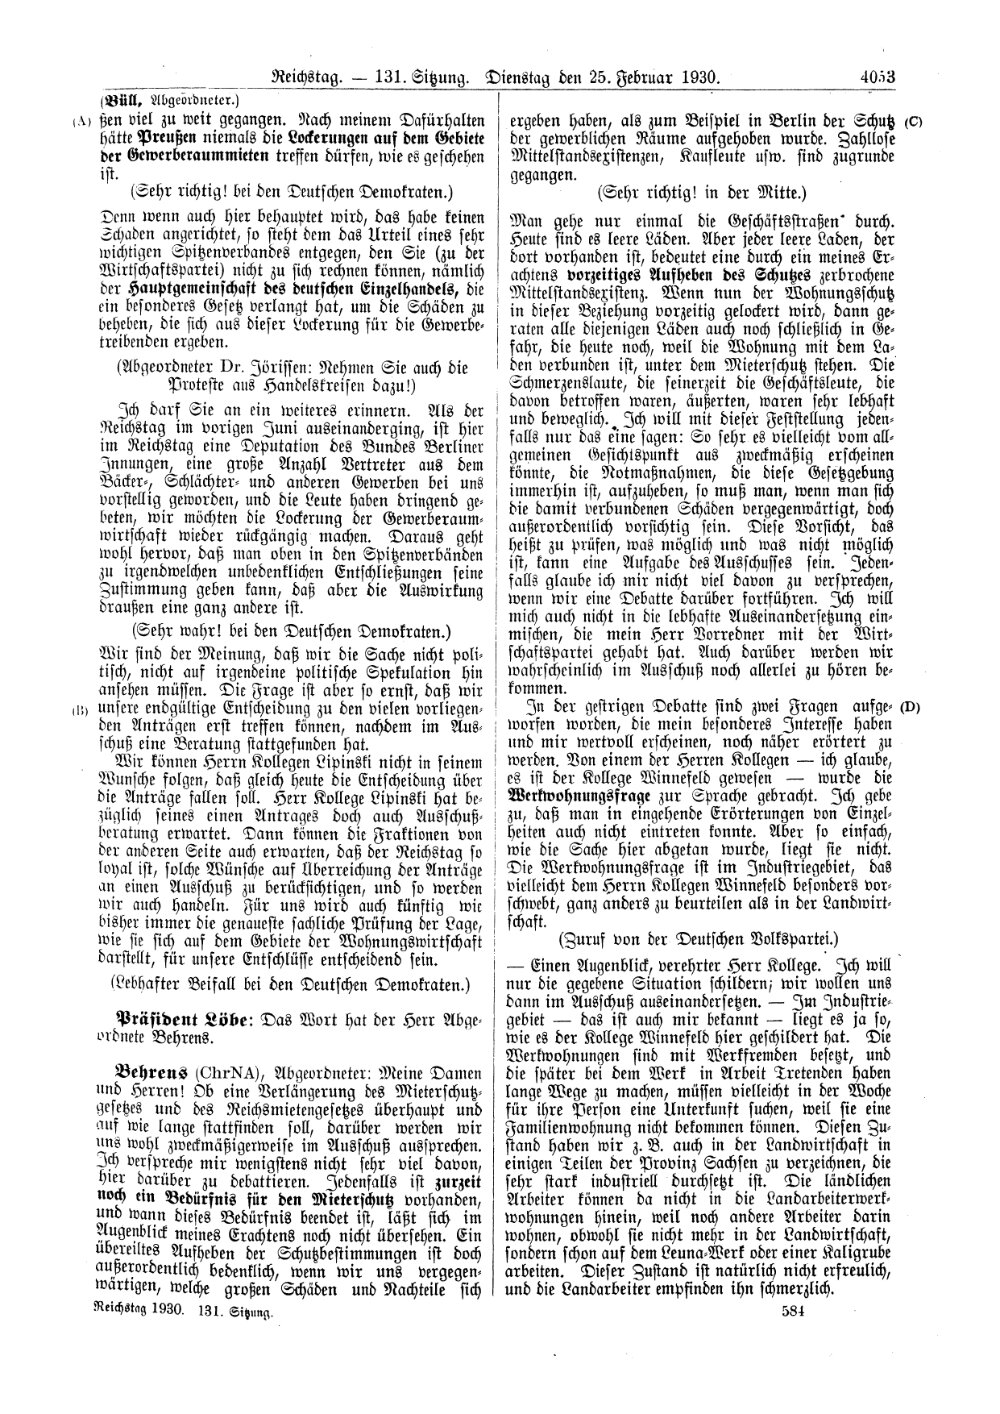 Scan of page 4053